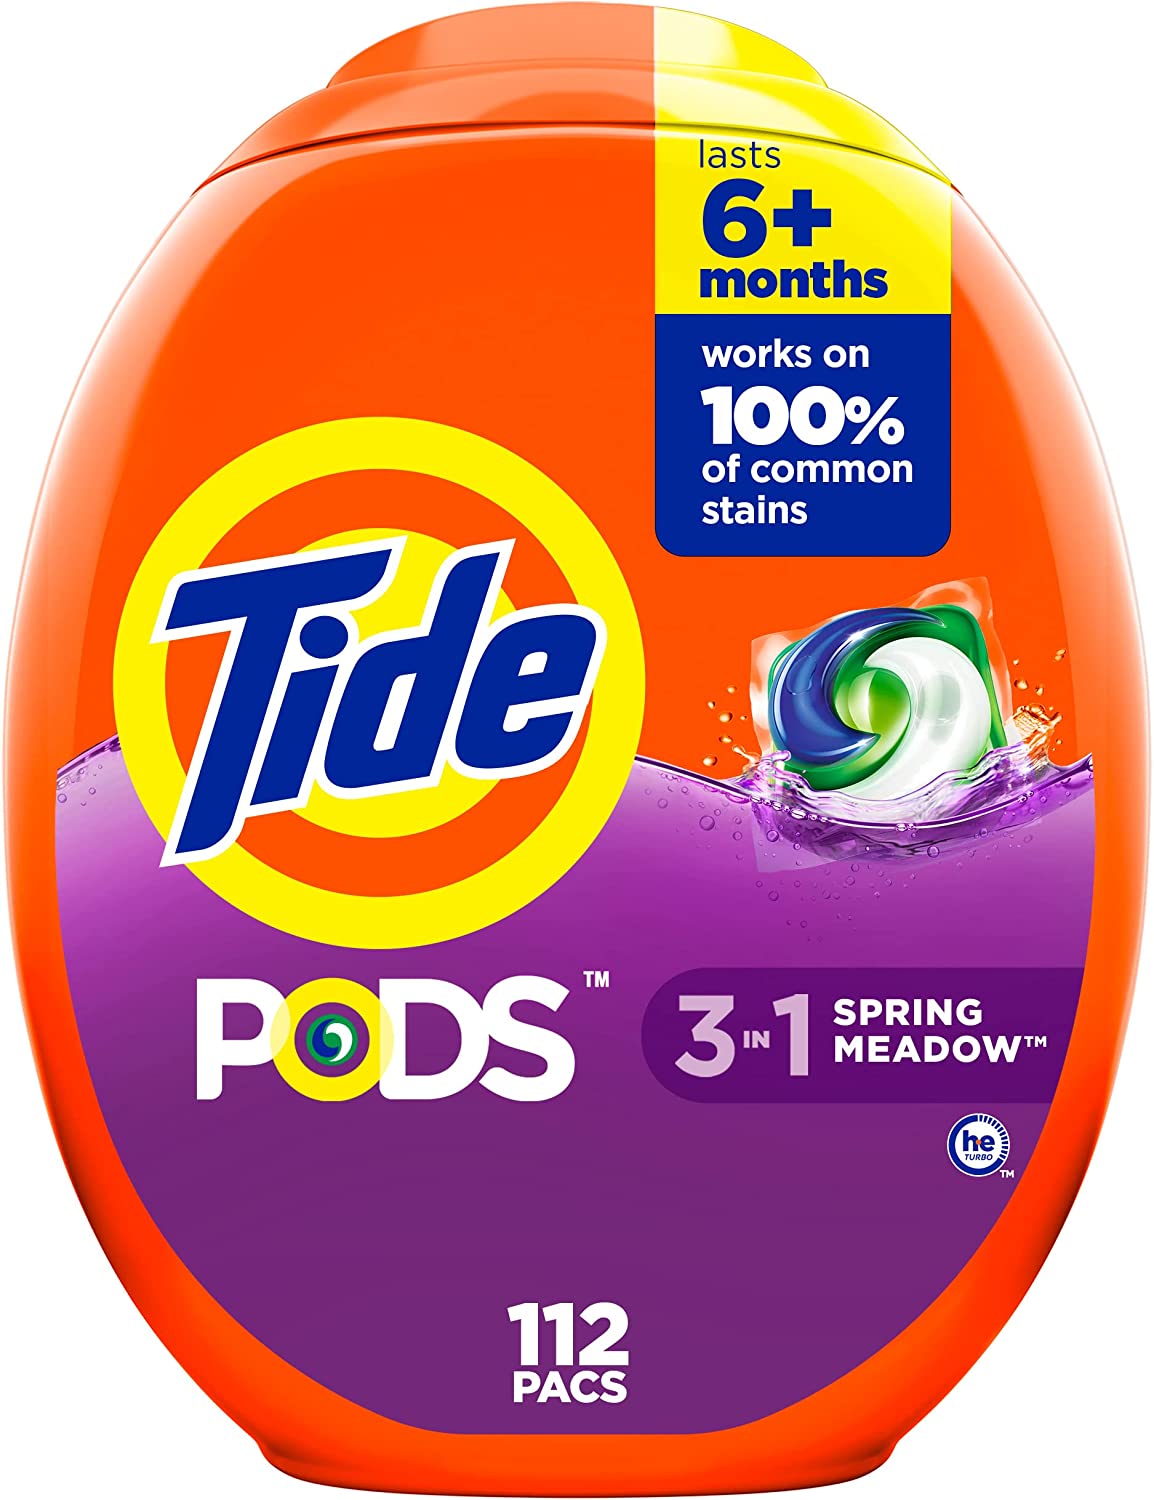 The 12 Best Laundry Pods of 2020: Reviews, Prices – SPY